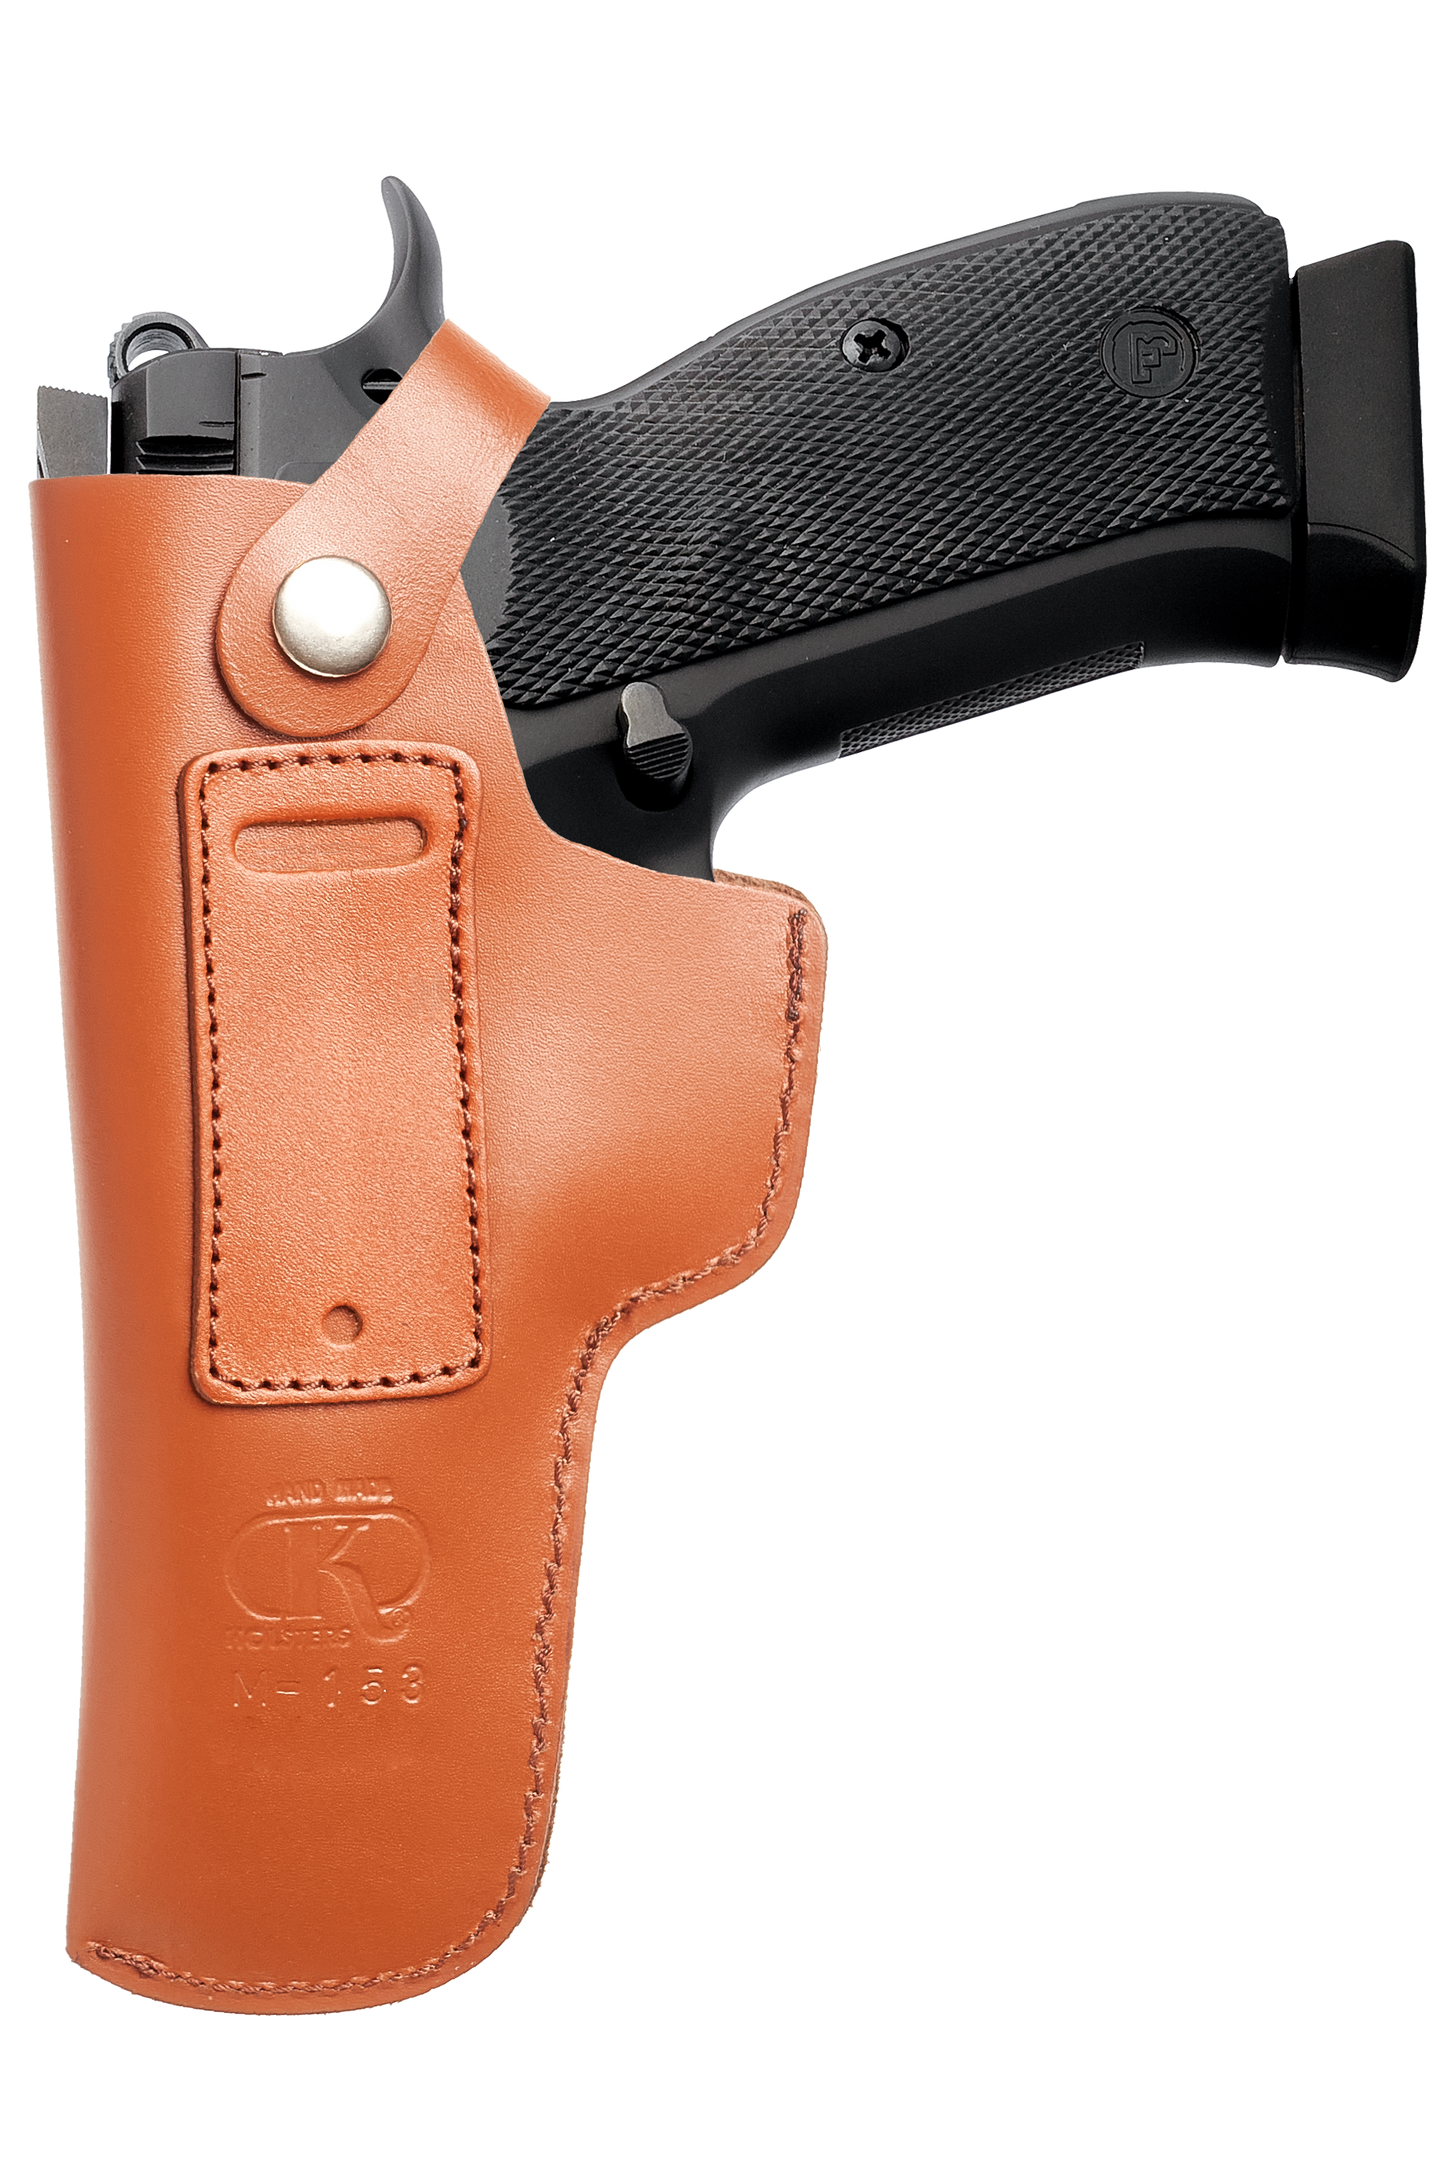 CZ 75 IWB Leather Holster with Belt Clip (KM153)